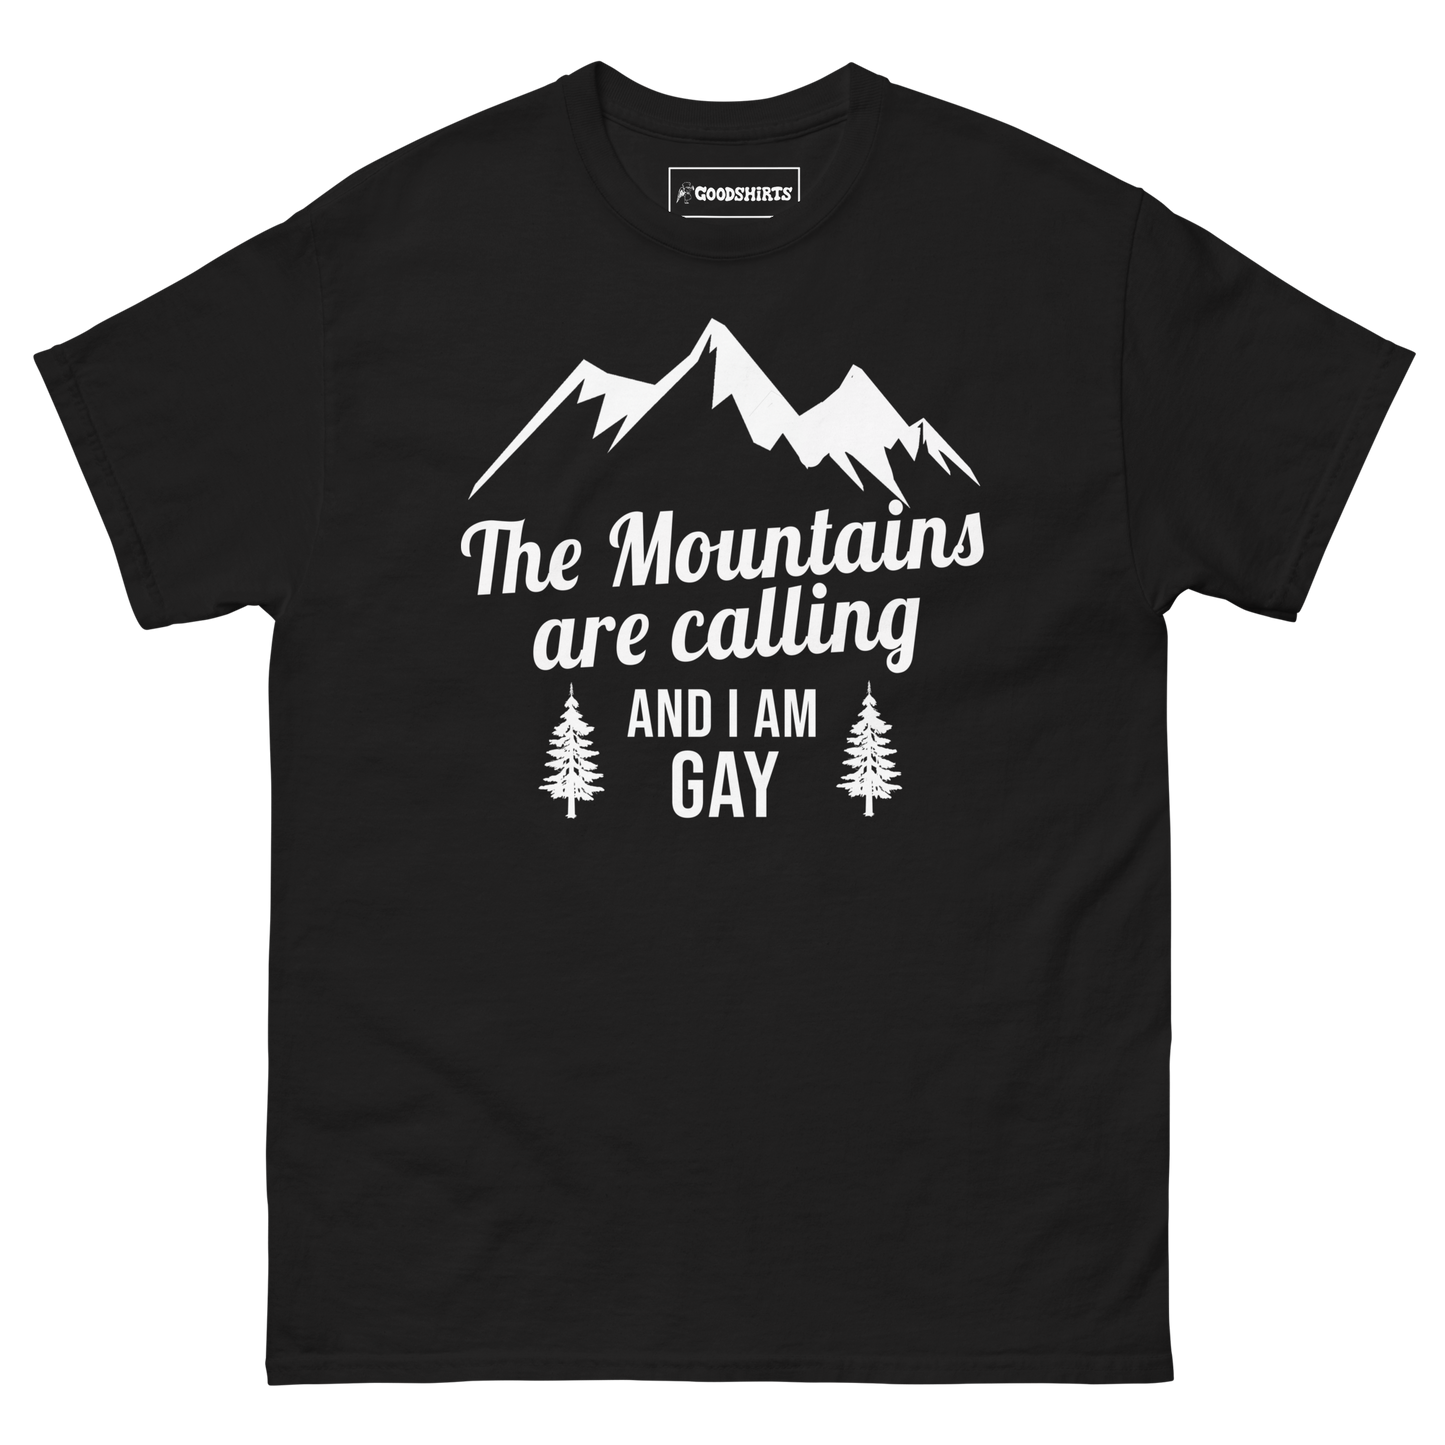 The Mountains Are Calling and I'm Gay.